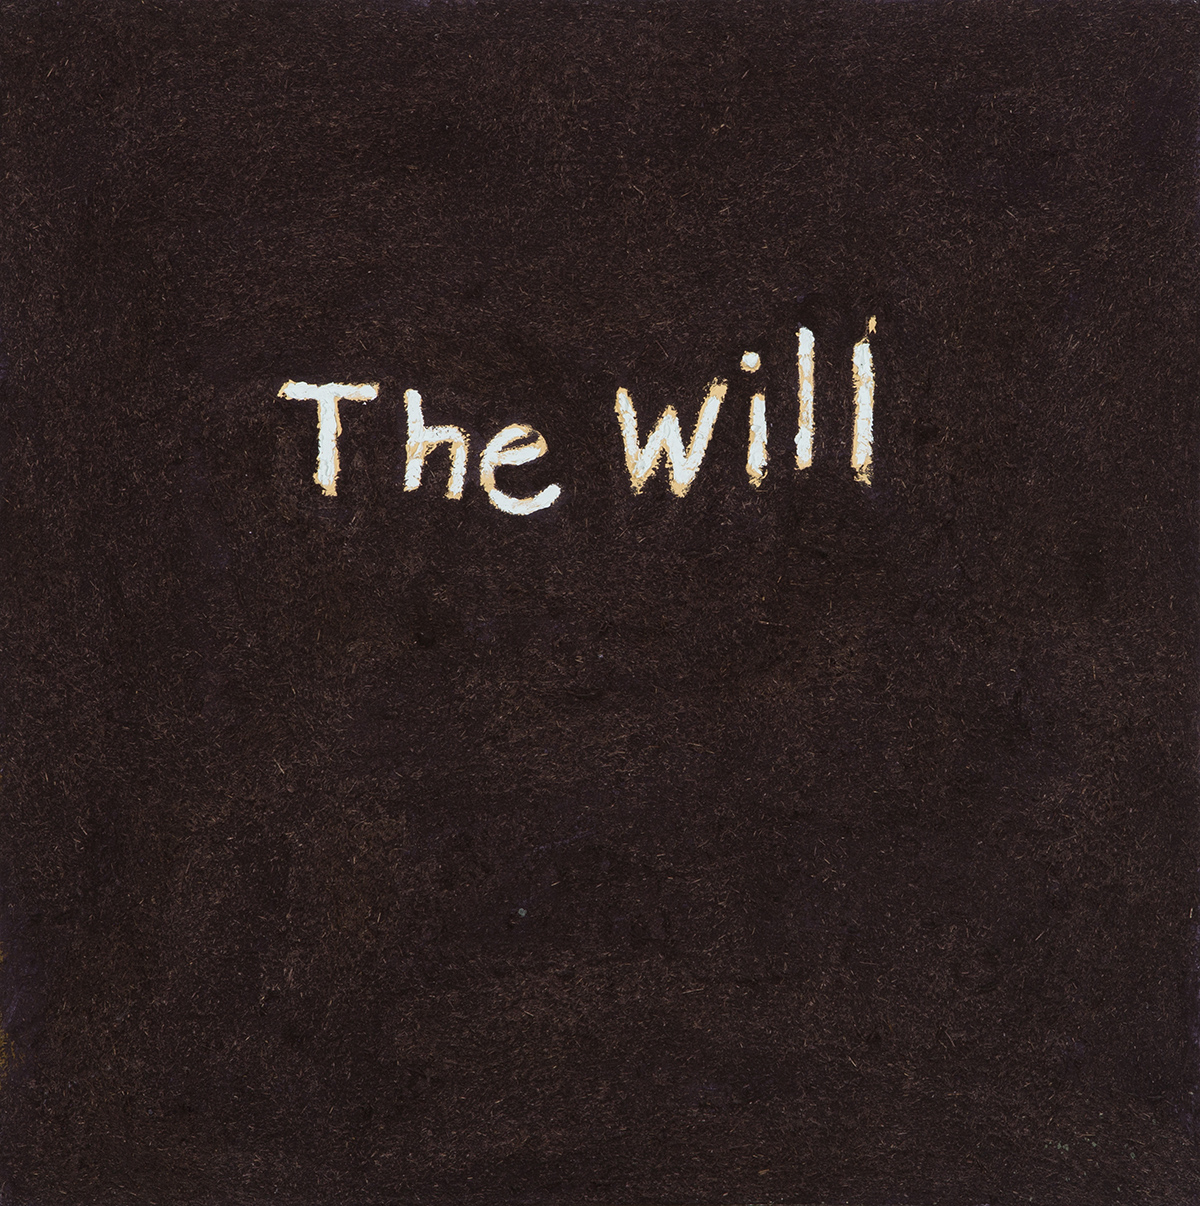  - The Will, 2015